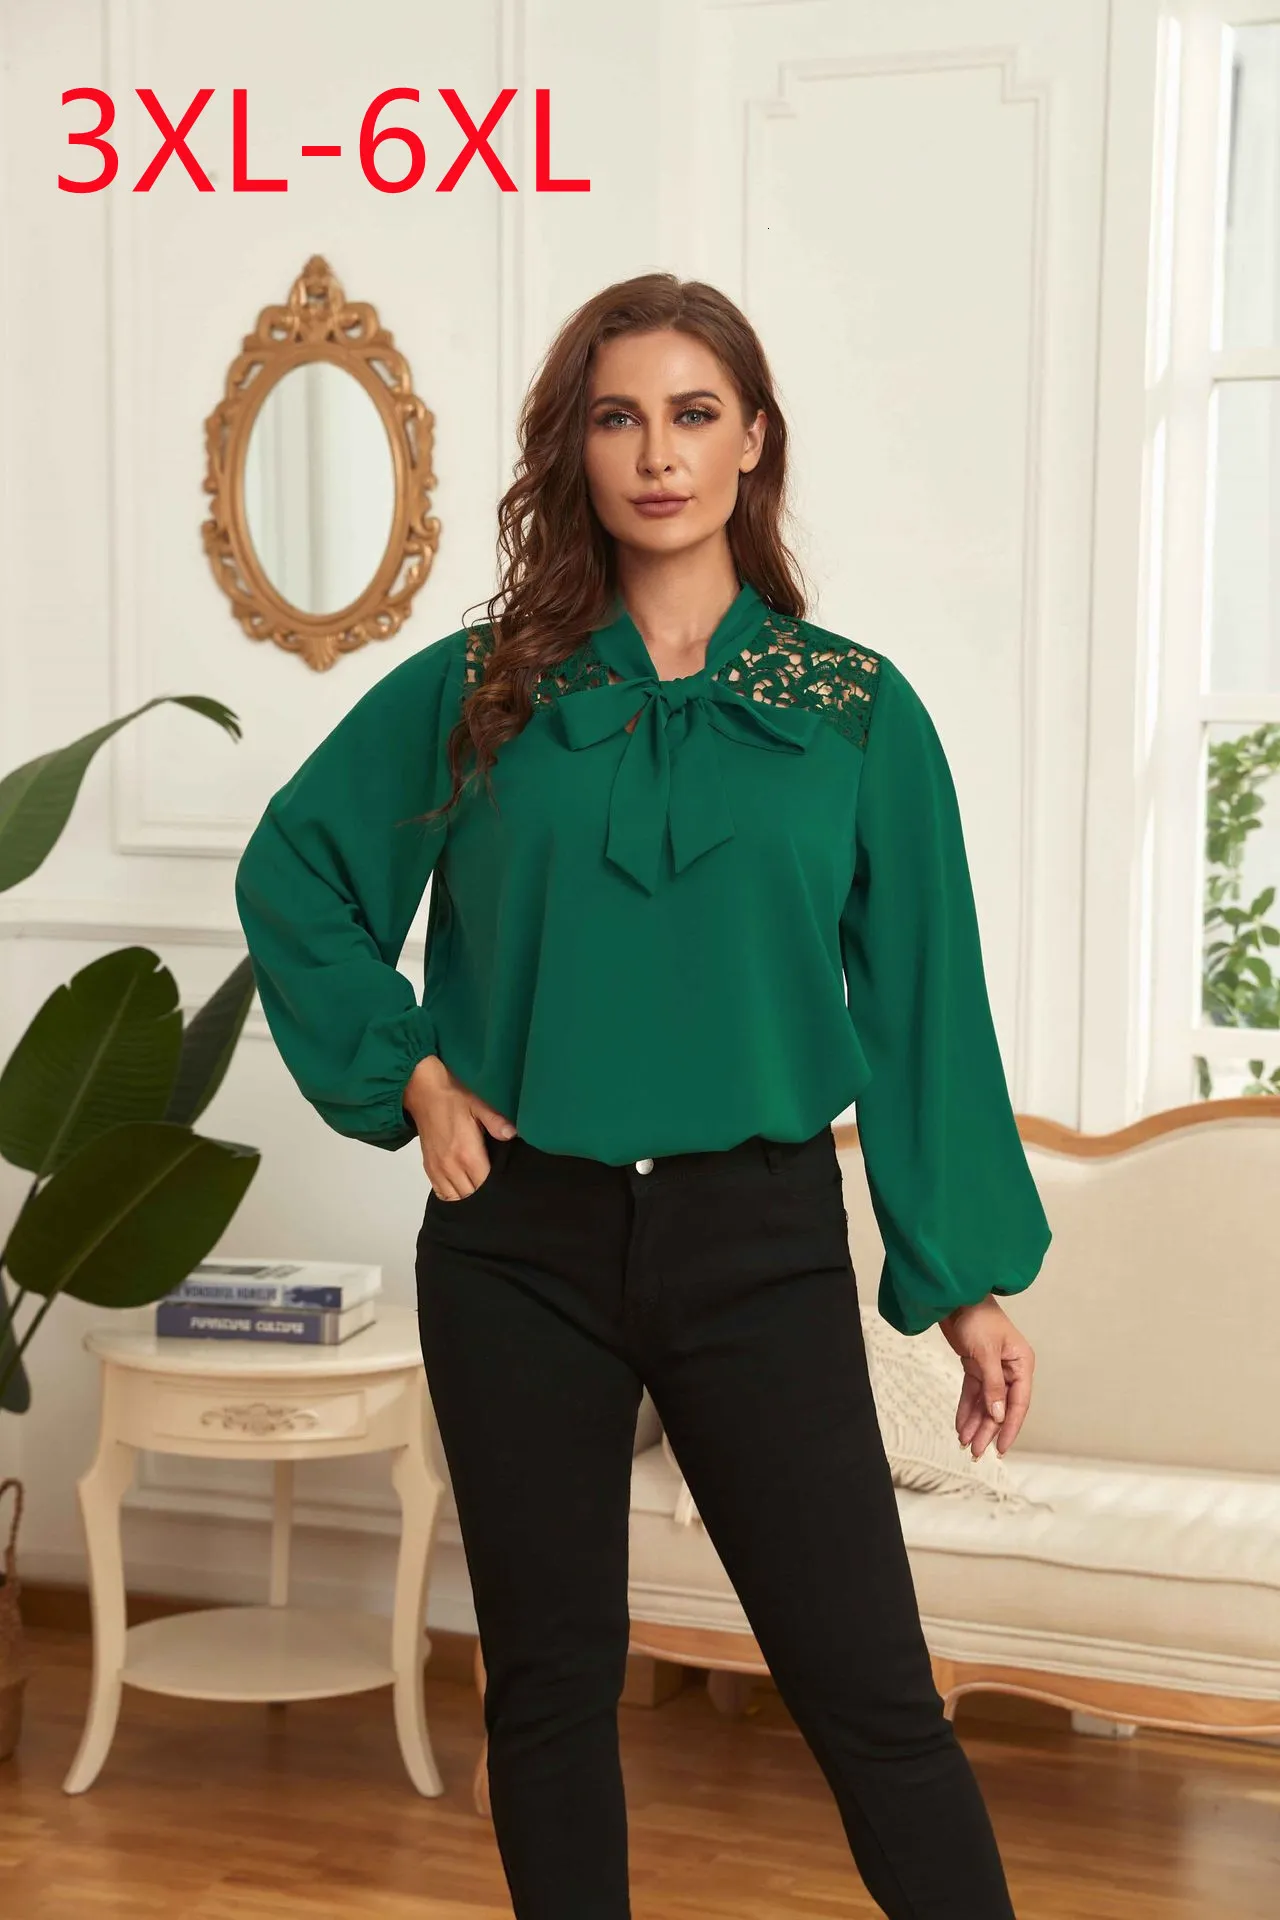 Green Chiffon Plus Size Bella And Canvas Shirts For Women Long Sleeve V  Neck Top In Sizes 3XL 6XL 230216 From Cong02, $31.05